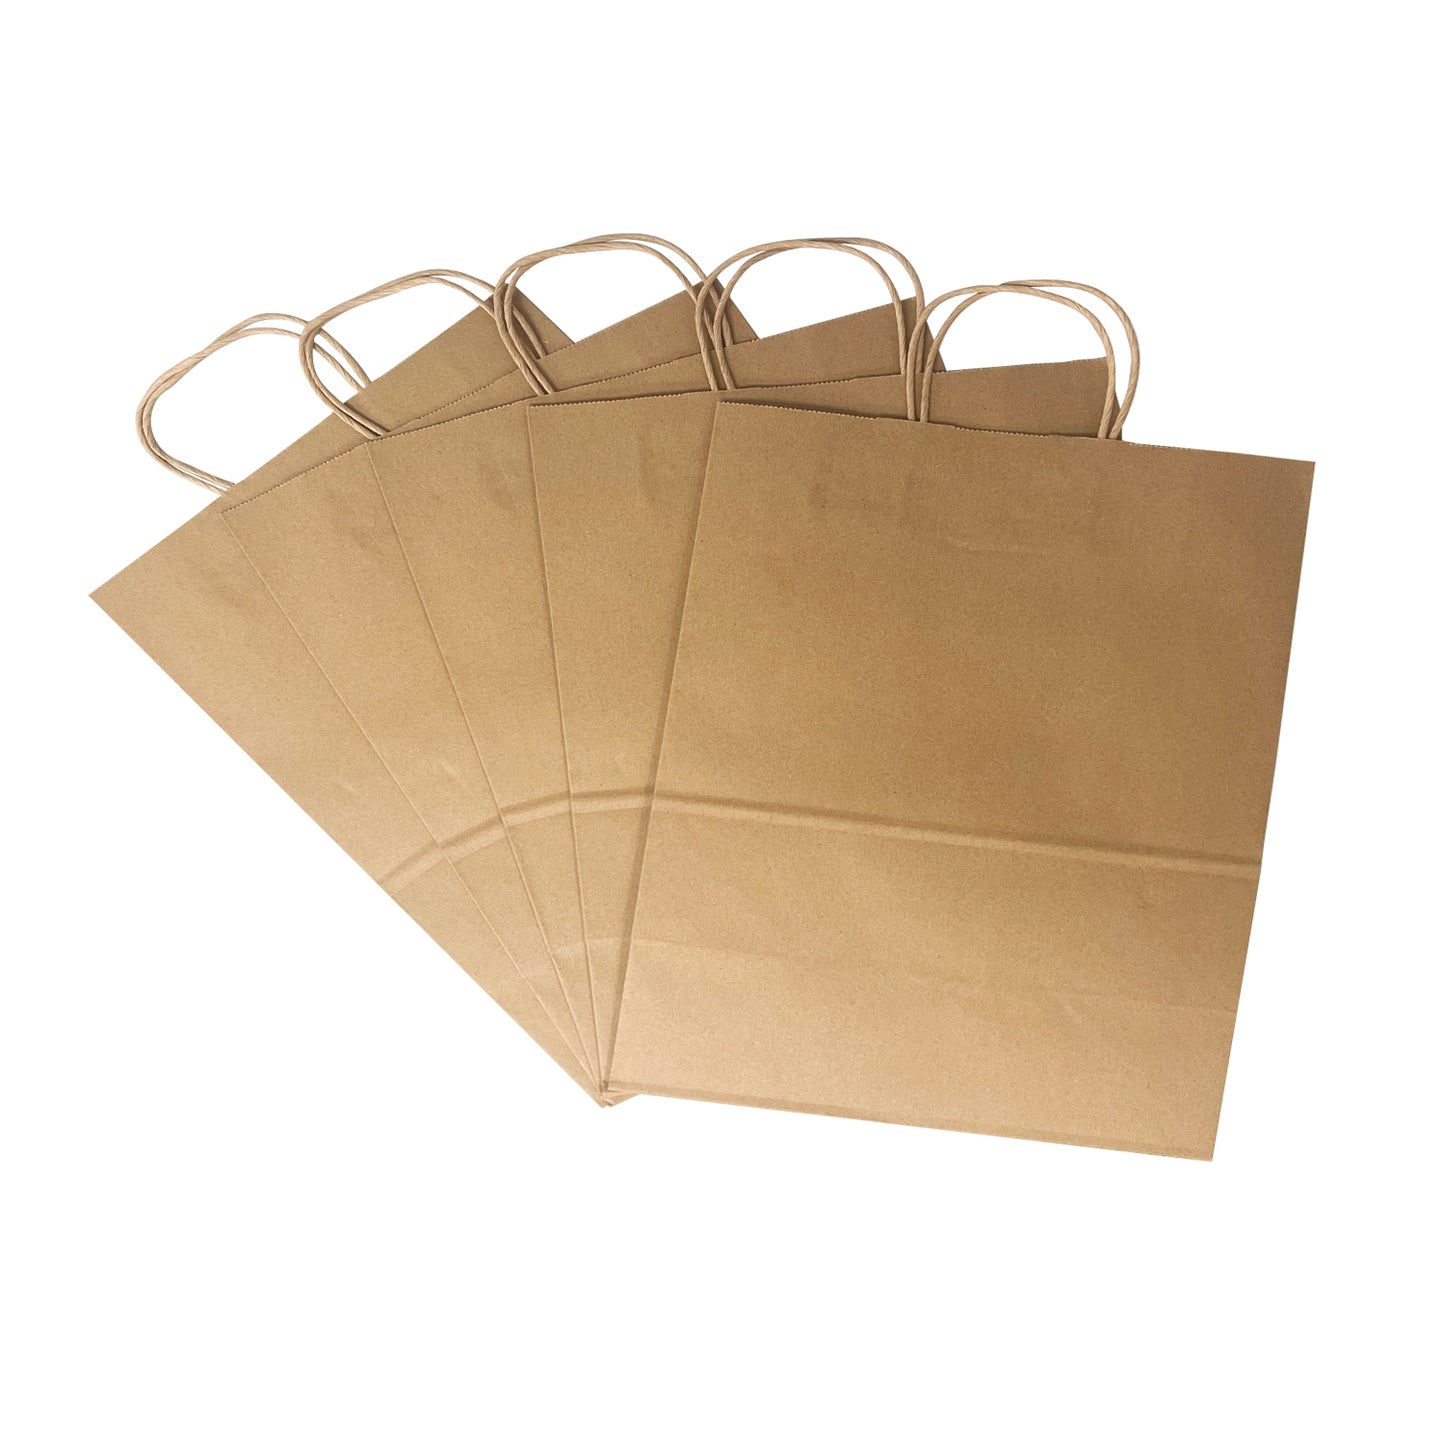 1182B | 200pcs Bento 11x8x12 inches Kraft Paper Bag Cardboard Insert with Twisted Handles, $0.50/pc